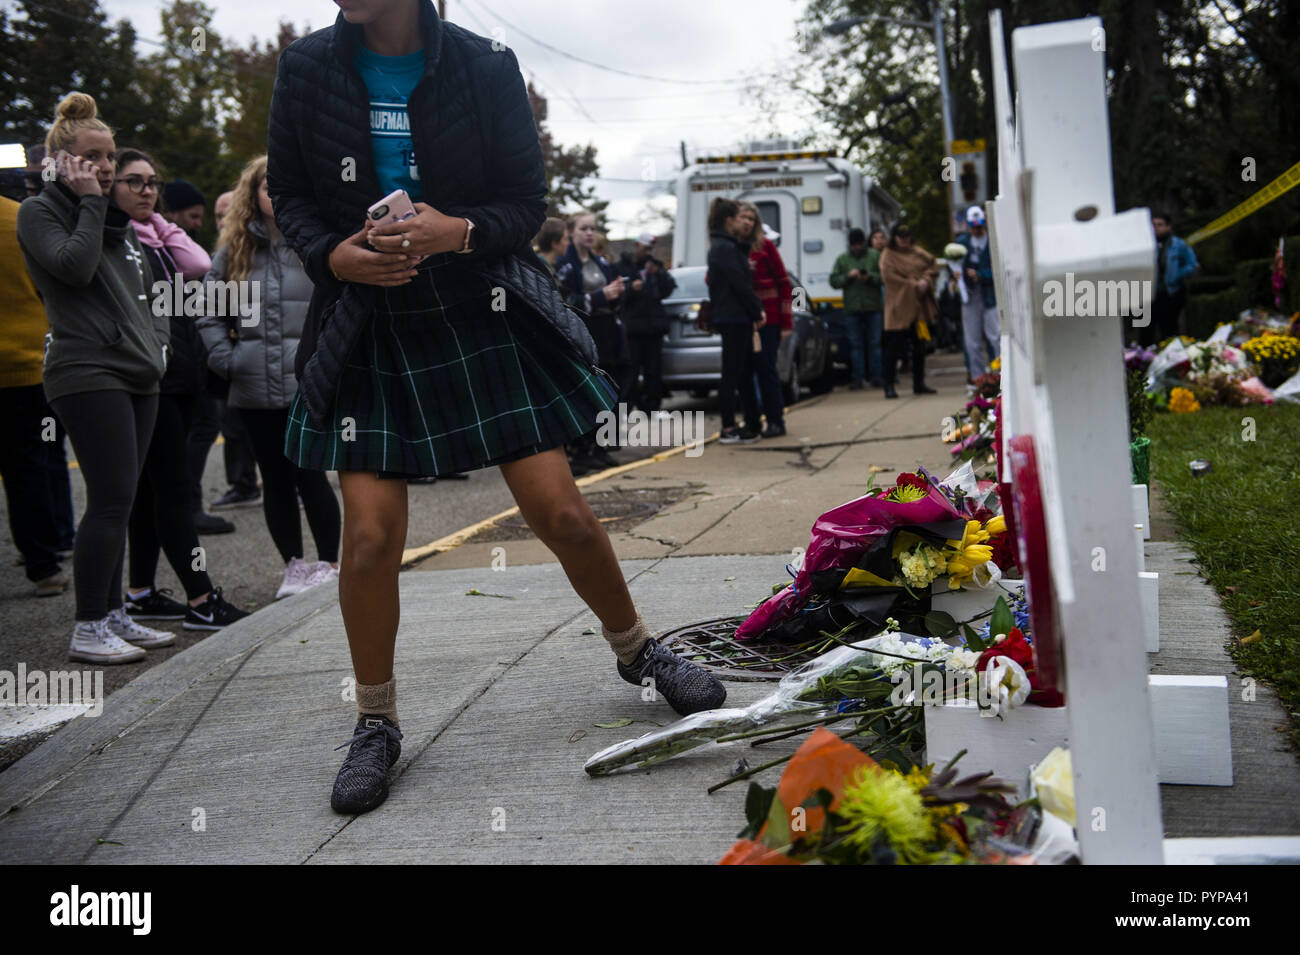 Pittsburgh, Pennsylvania, USA. 29th Oct, 2018. Flowers and stones are placed on the memorials erected outside of the Tree of Life Synagogue in Squirrel Hill. Members of Pittsburgh and the Squirrel Hill community pay their respects at the memorial to the 11 victims of the Tree of Life Synagogue massacre perpetrated by suspect Robert Bowers on Saturday, October 27. Credit: Matthew Hatcher/SOPA Images/ZUMA Wire/Alamy Live News Stock Photo